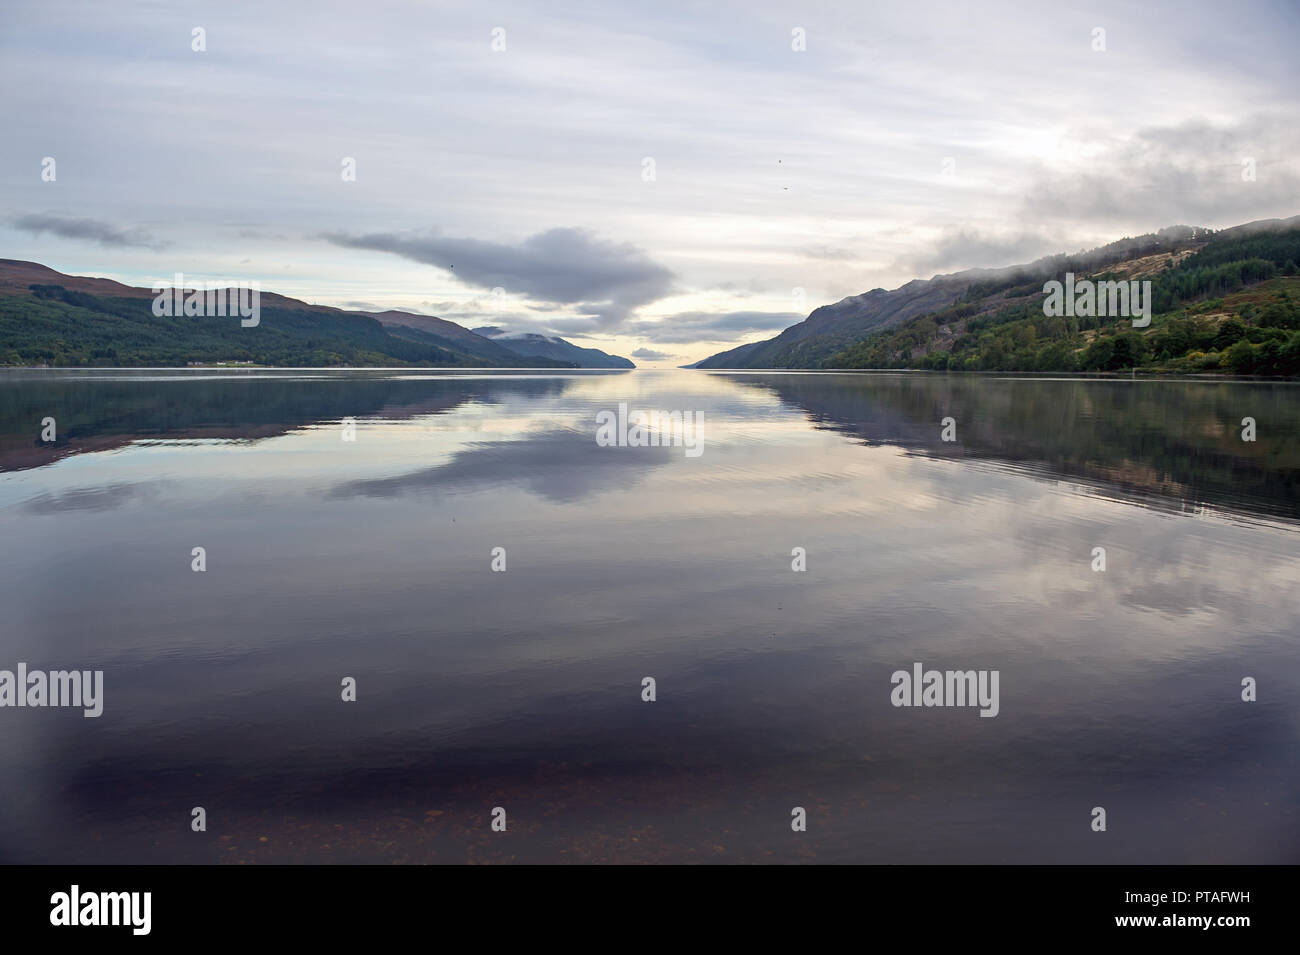 Loch Ness on a calm day Stock Photo